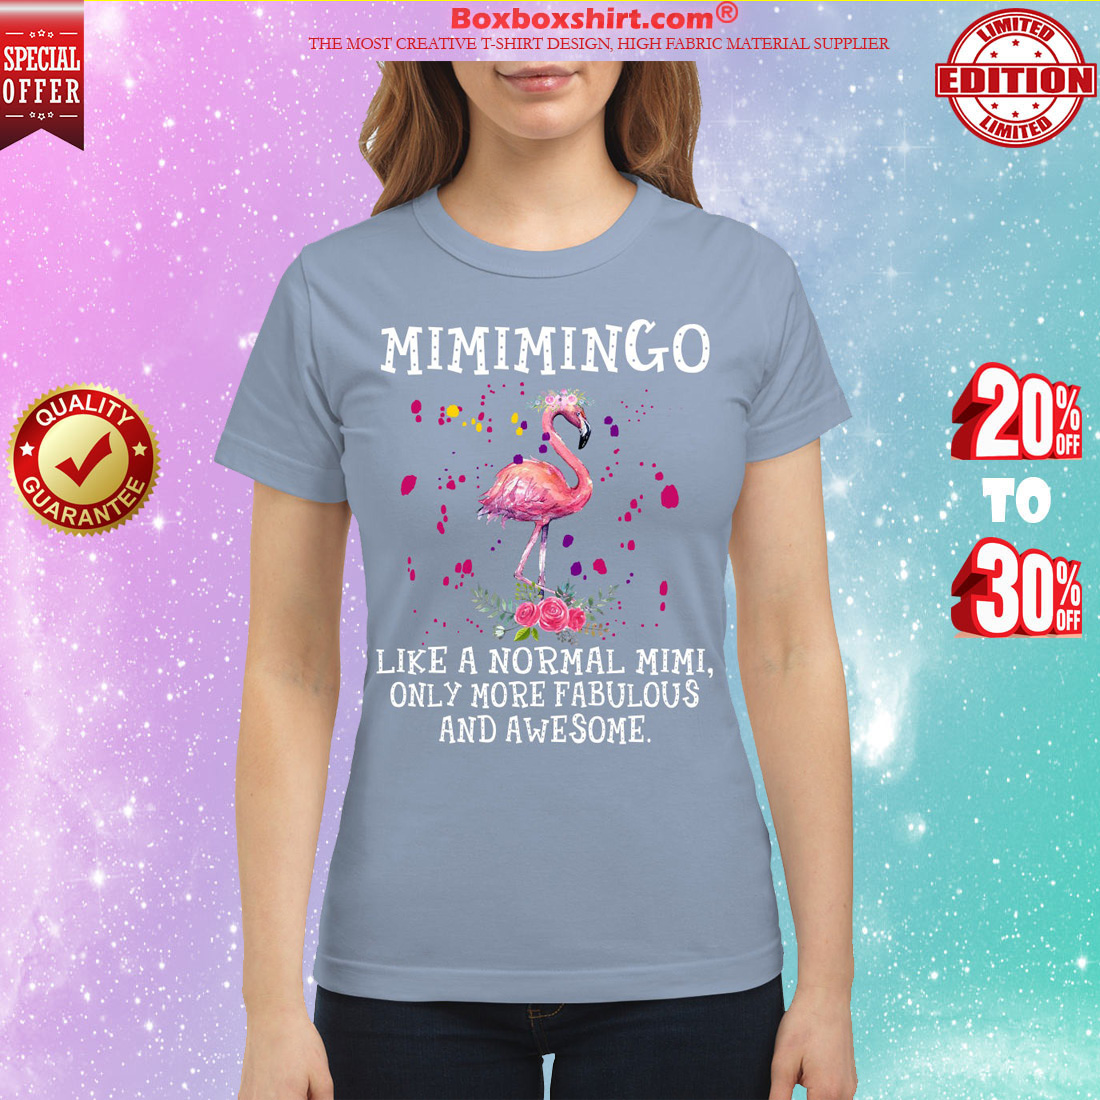 Mimingo like a normal mimi only more fabulous and awesome classic shirt